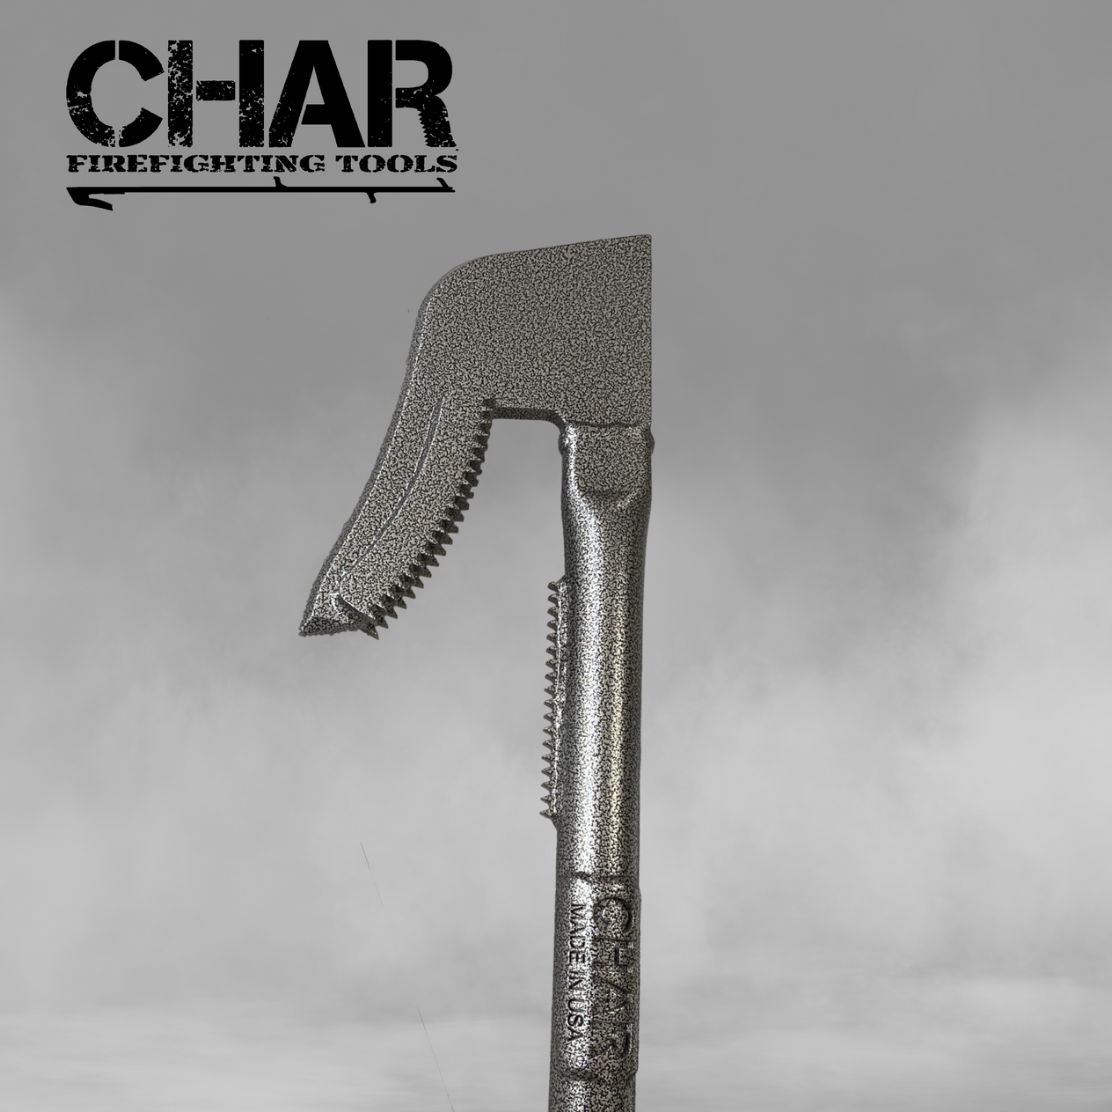 The CHAR Tool